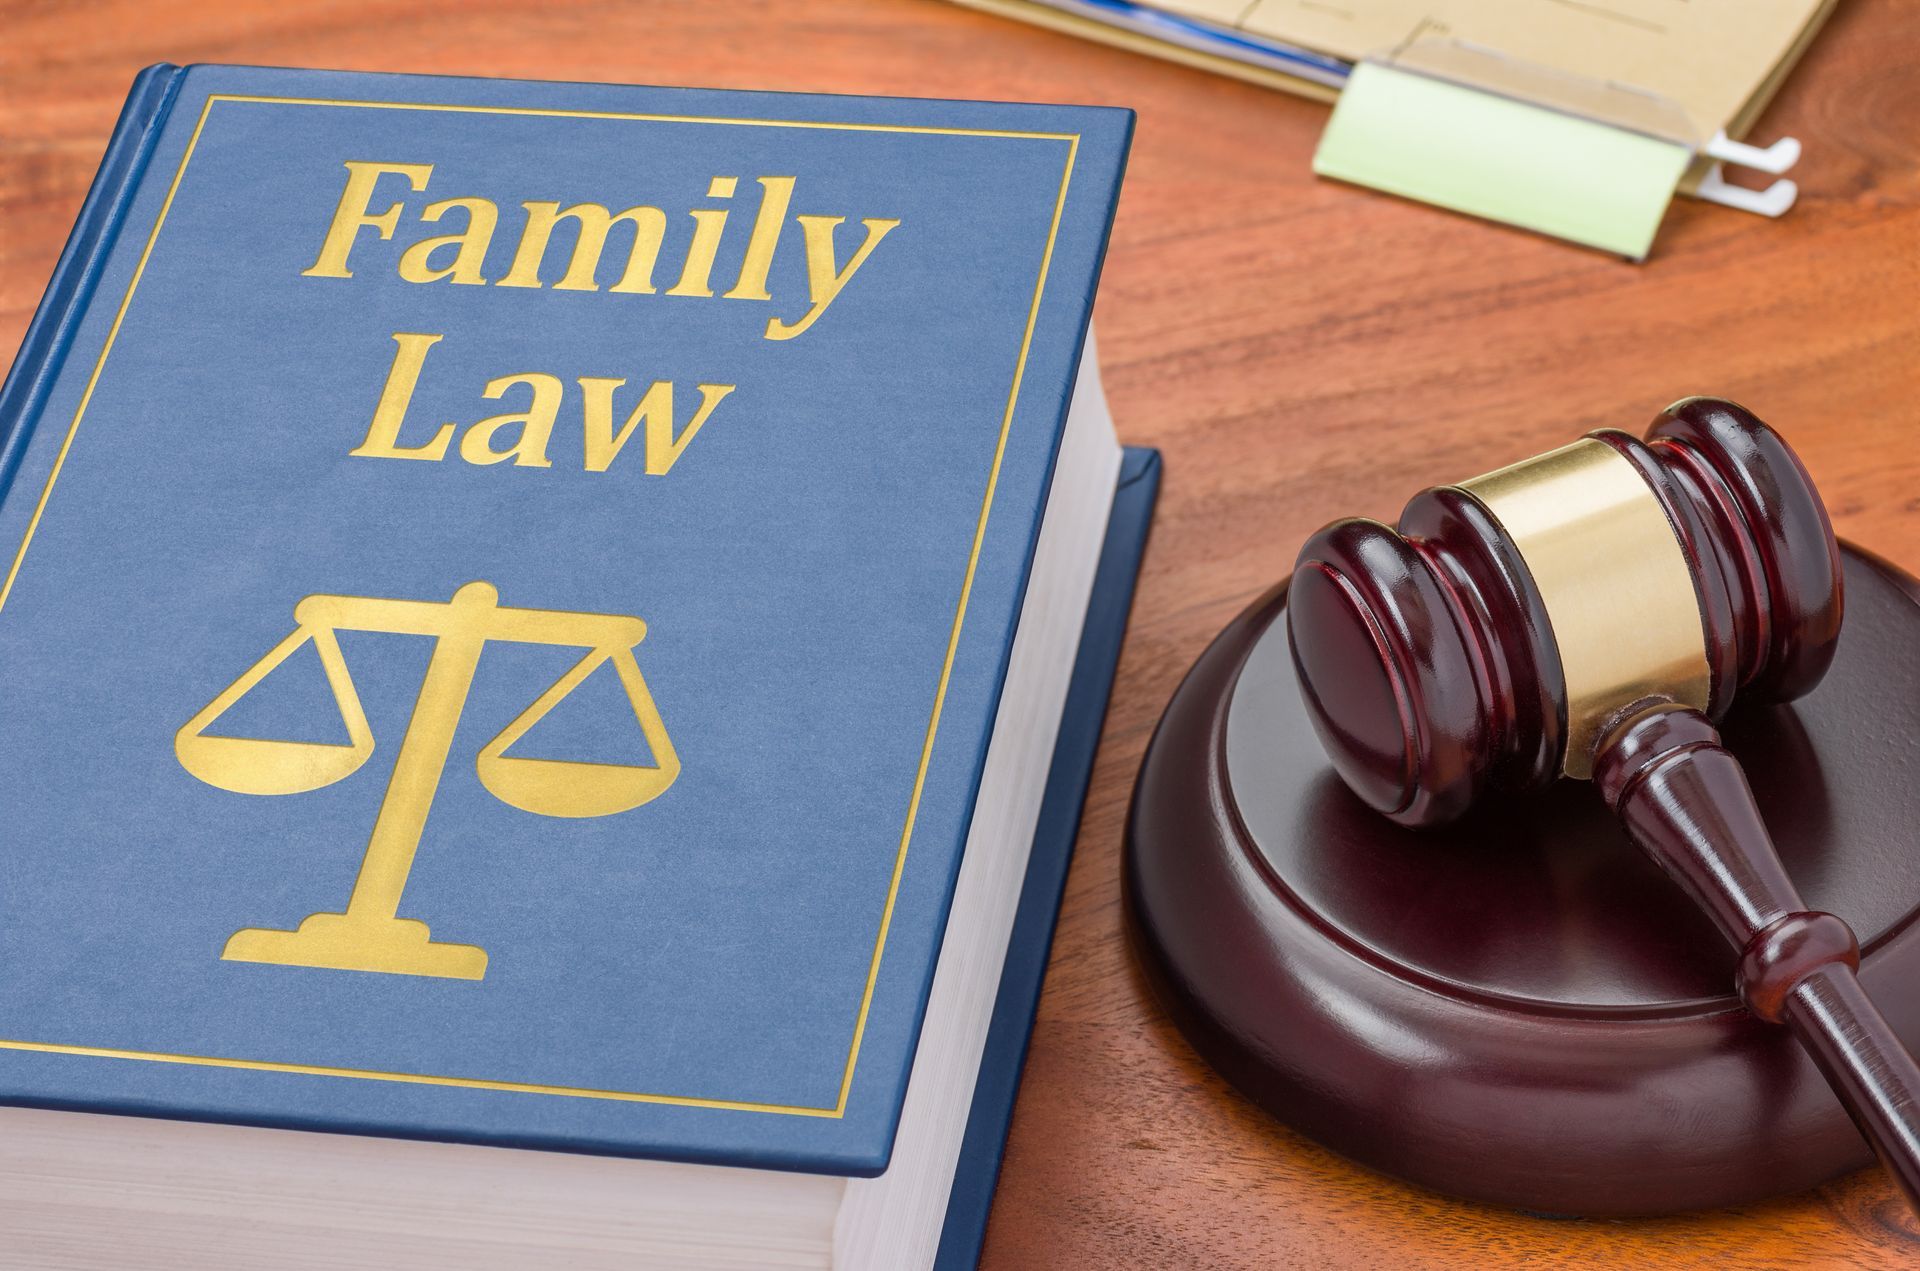 a blue book titled family law sits on a wooden table next to a judge 's gavel .